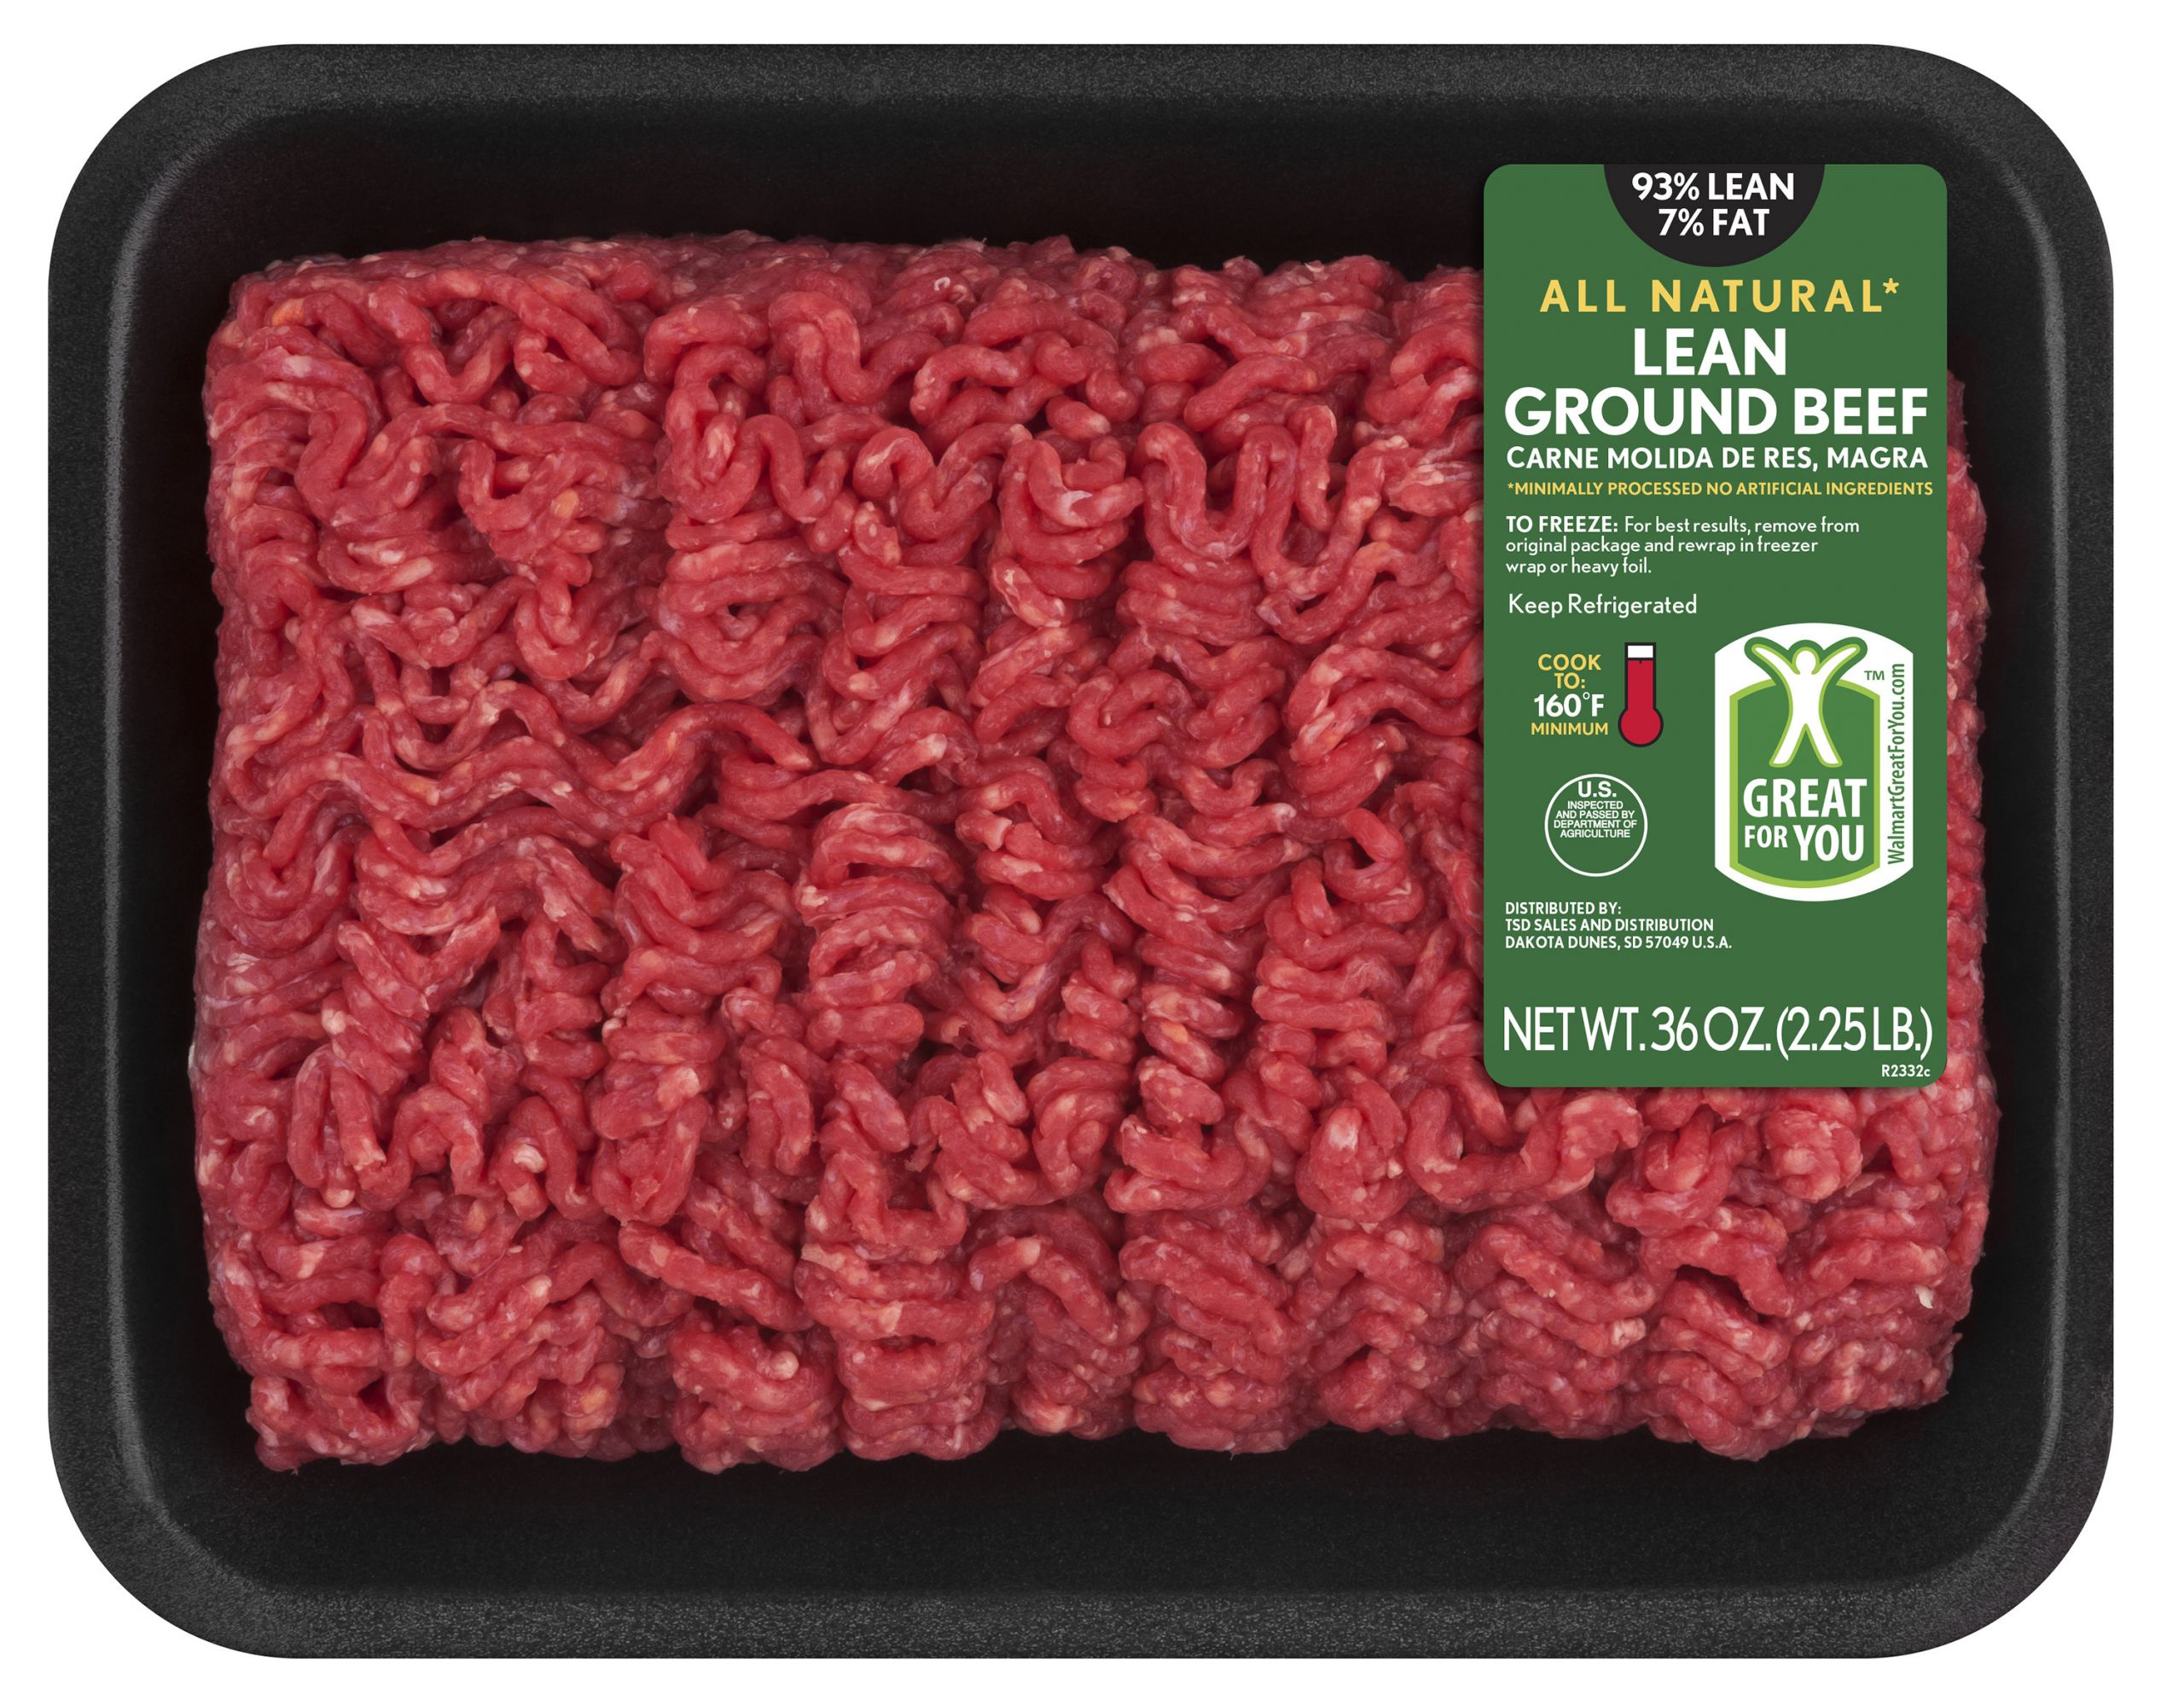 Ground Beef Walmart
 All Natural Lean Fat Lean Ground Beef Tray 2 25